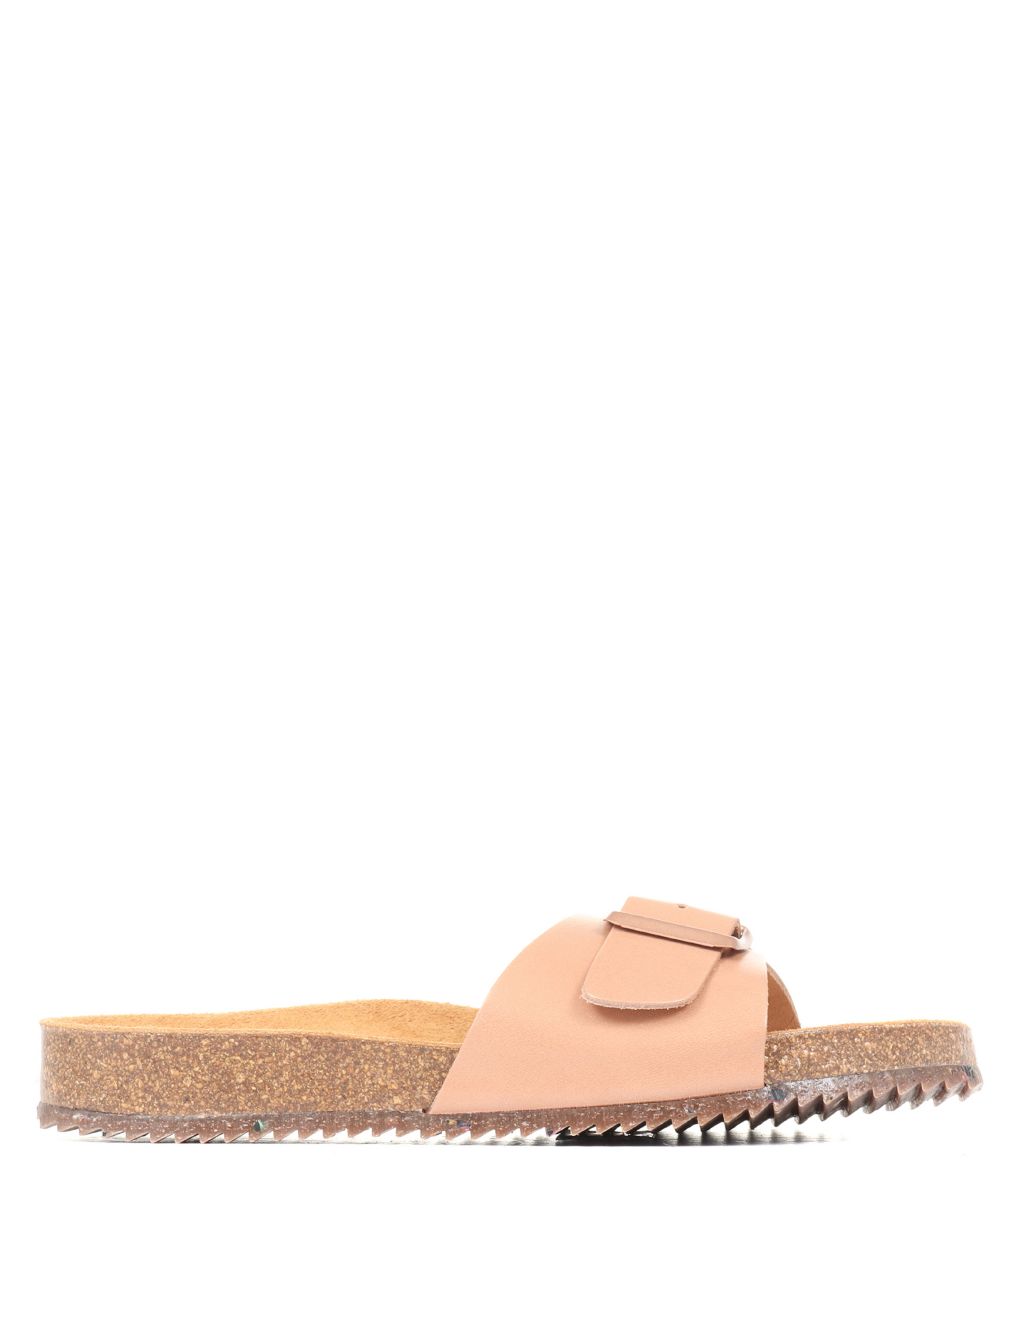 Leather Buckle Flat Mules image 1